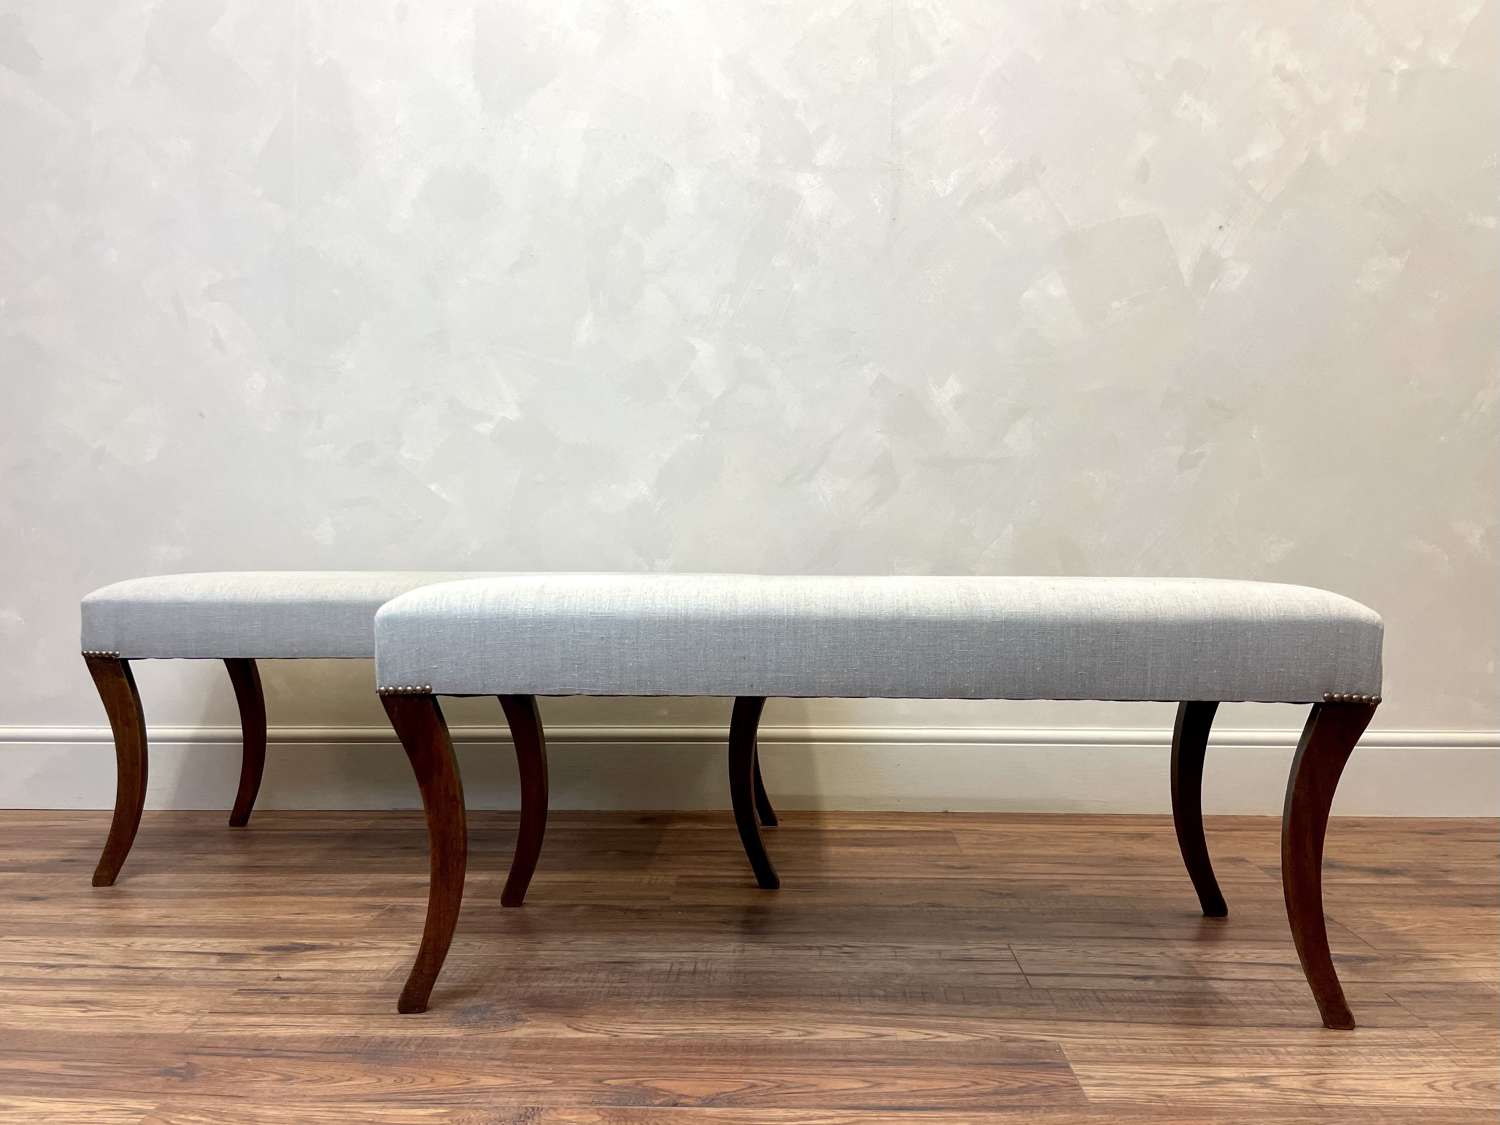 Pair of Upholstered Sabre Leg Benches